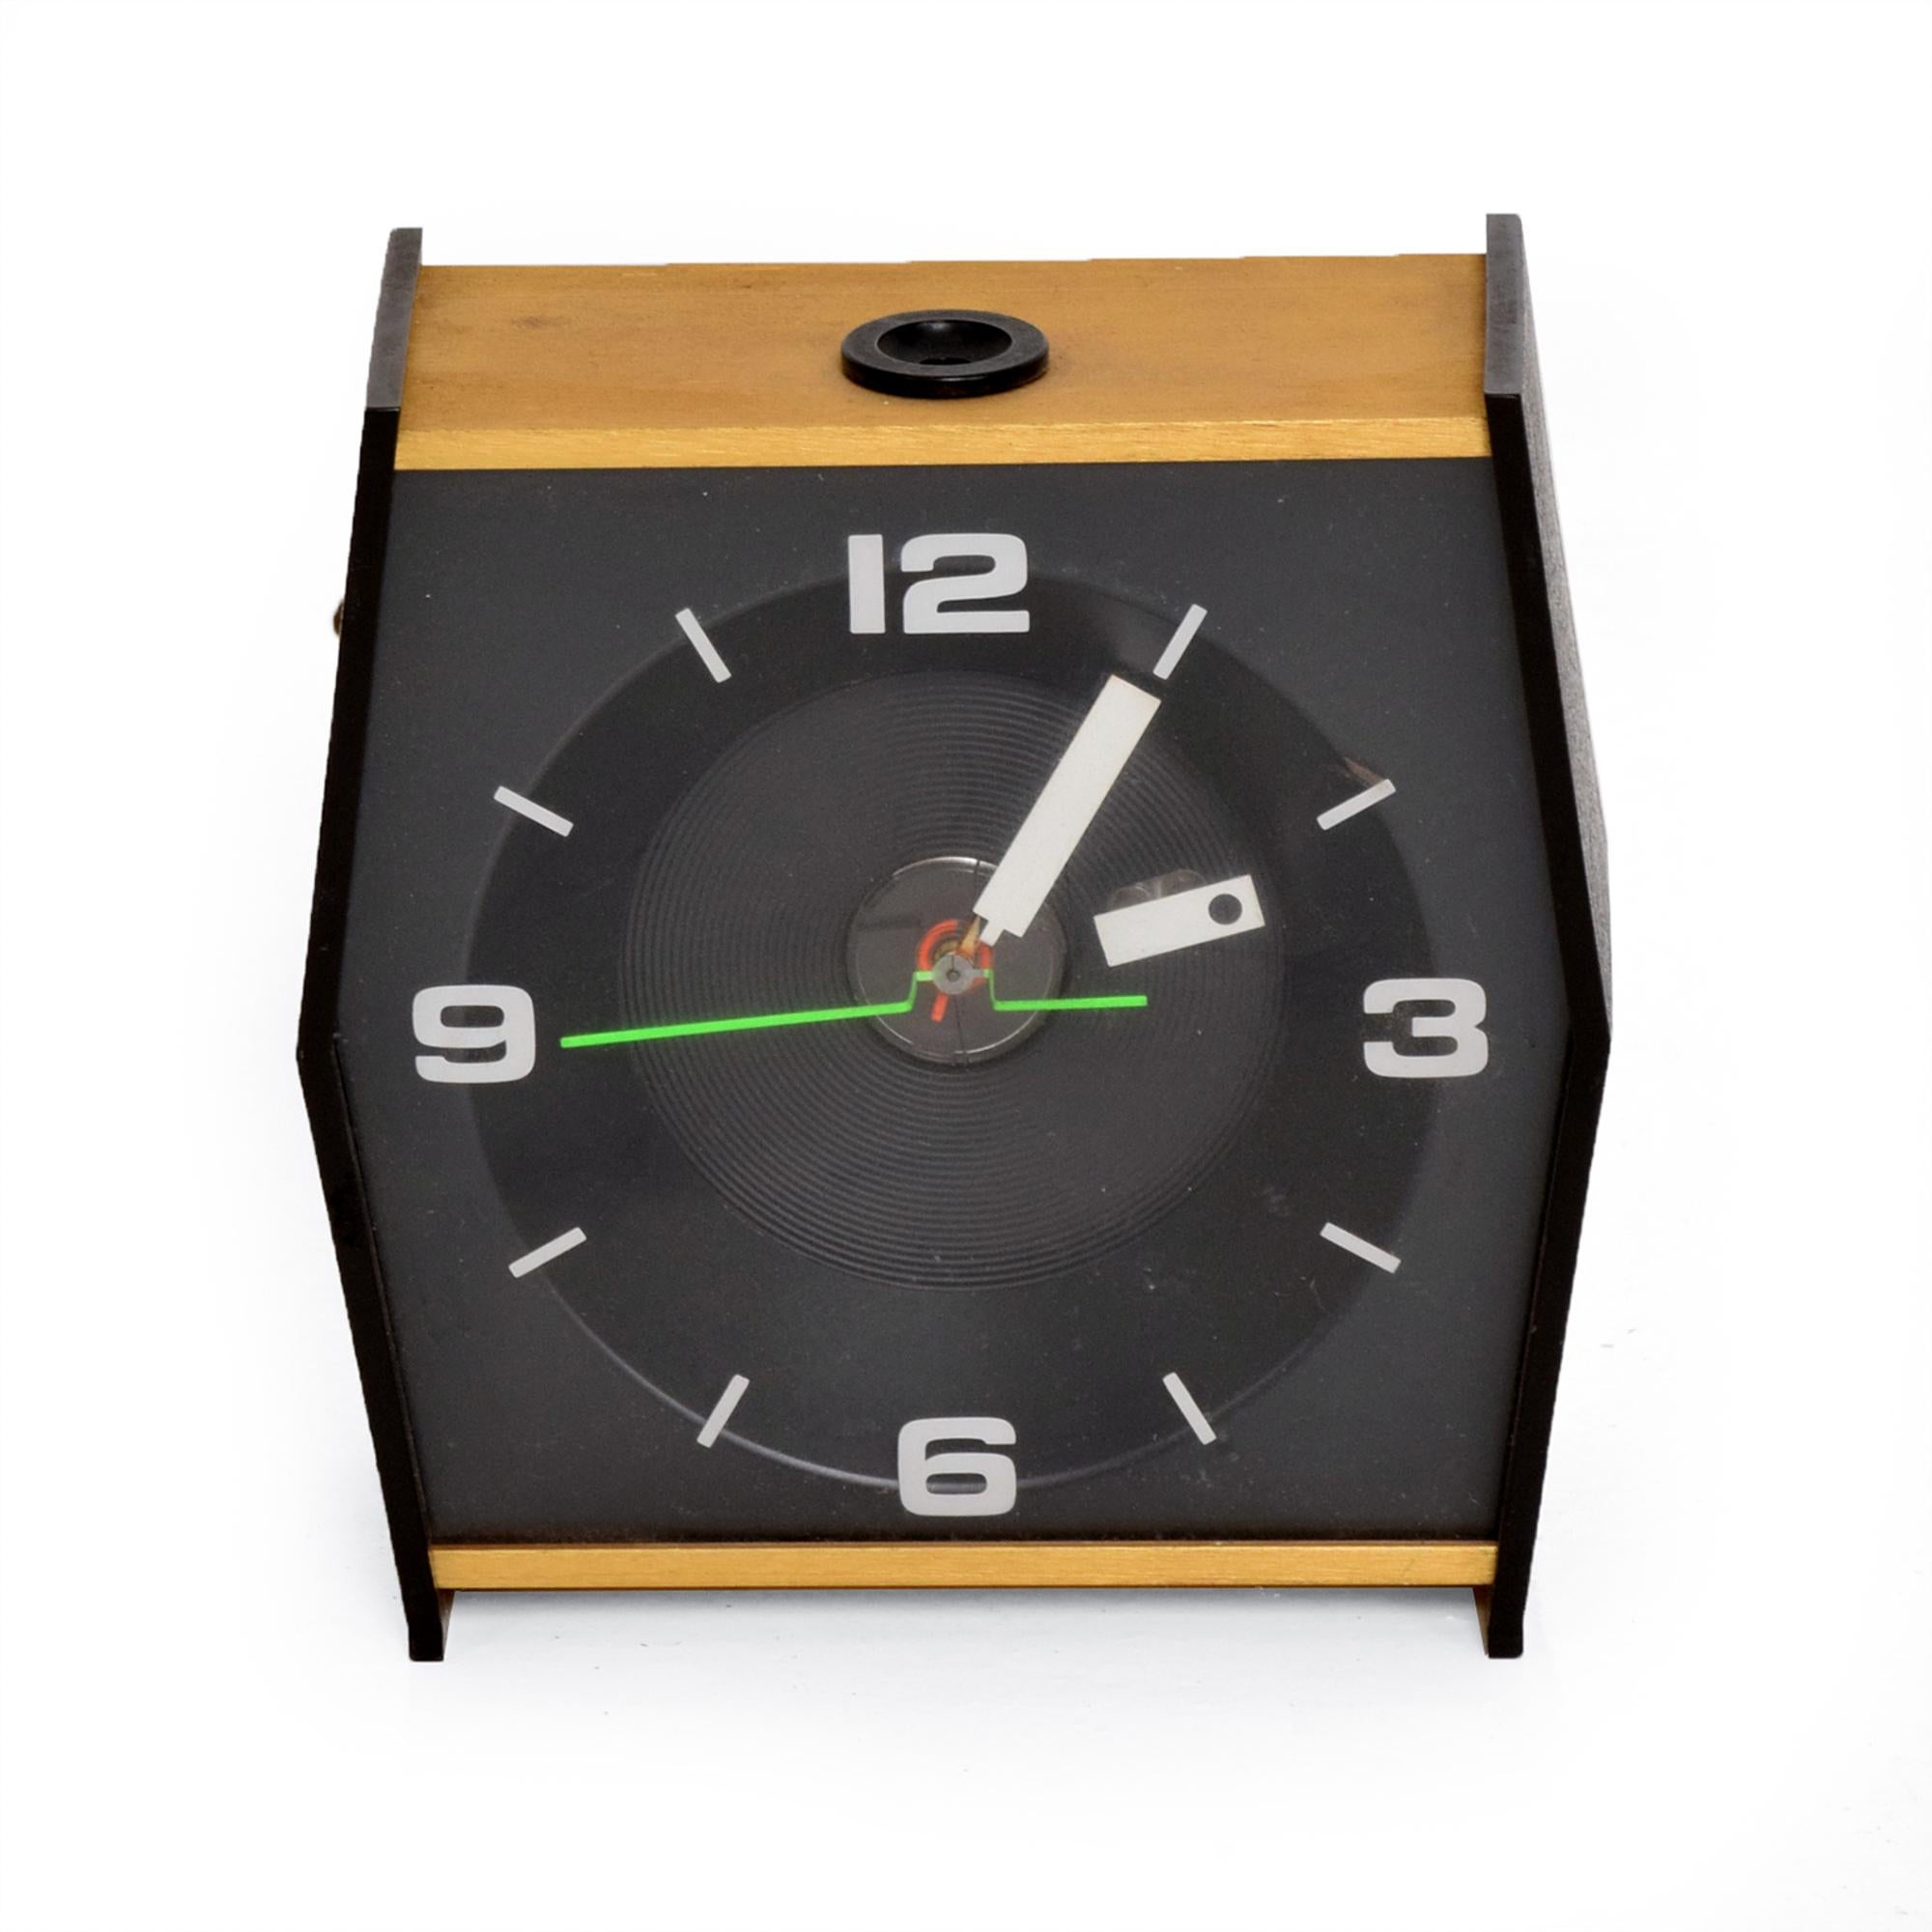 Midcentury vintage high time alarm ceiling clock by Stancraft St Paul MN
Designed with Top feature of projected light to Ceiling Wall via internal bulb-untested function capability.
 6 W x 6 H x 3 D
Metal and plastic design.
Selling as is vintage